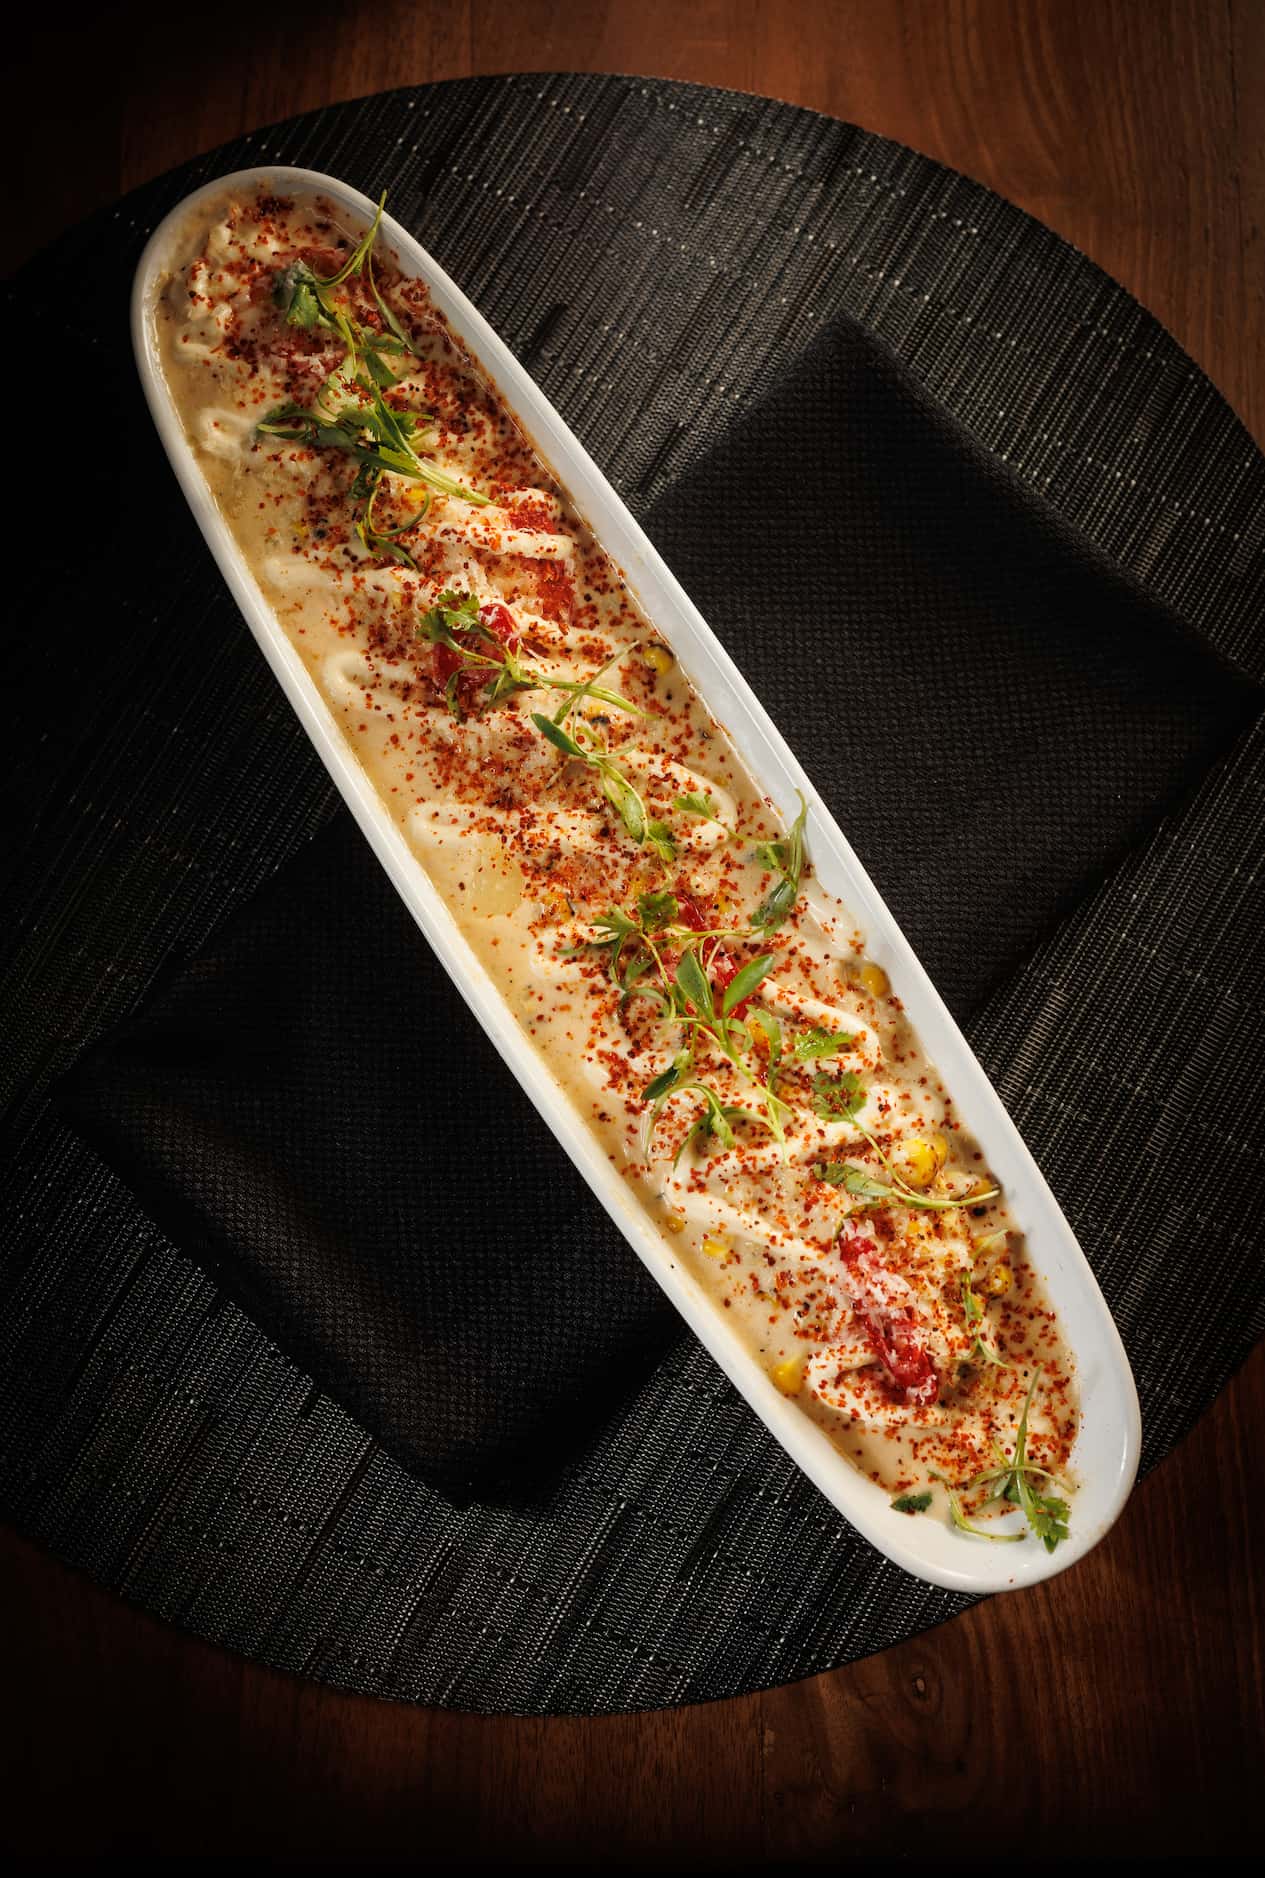 Lobster elotes are a decadent and delicious side at The Mexican in Dallas' Design District.